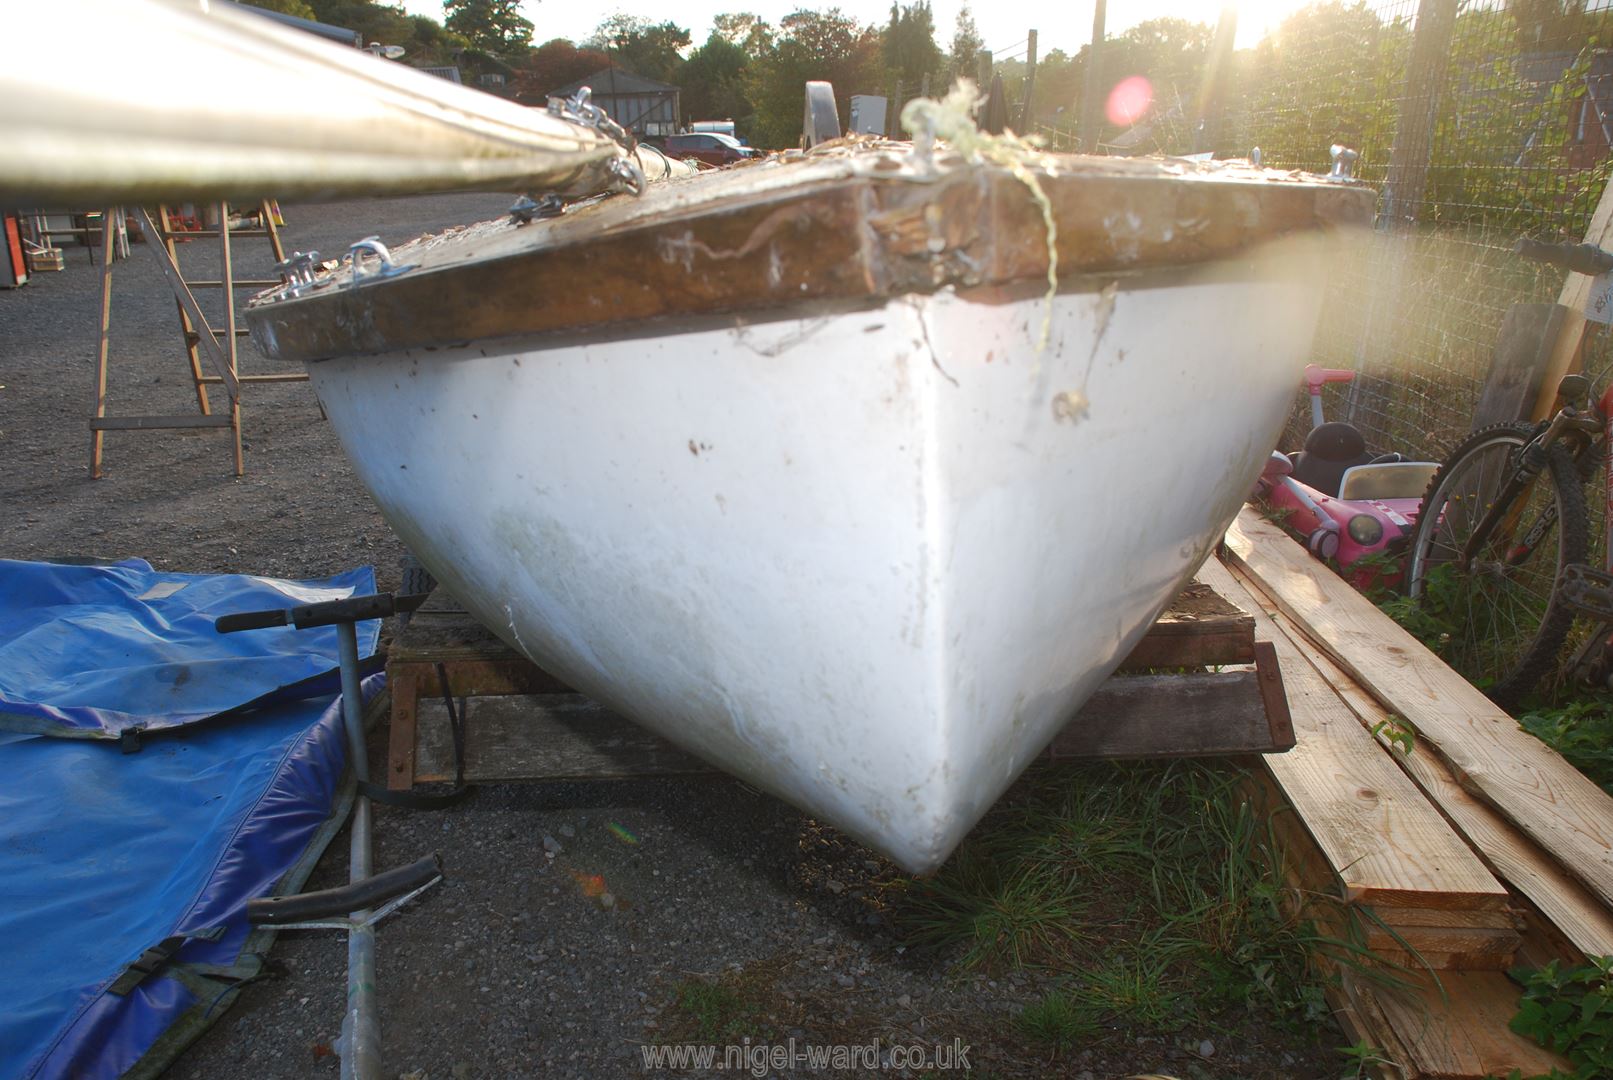 A glass fibre hulled sailing dinghy for restoration with 17' 2" high aluminium mast, fittings, - Image 10 of 14